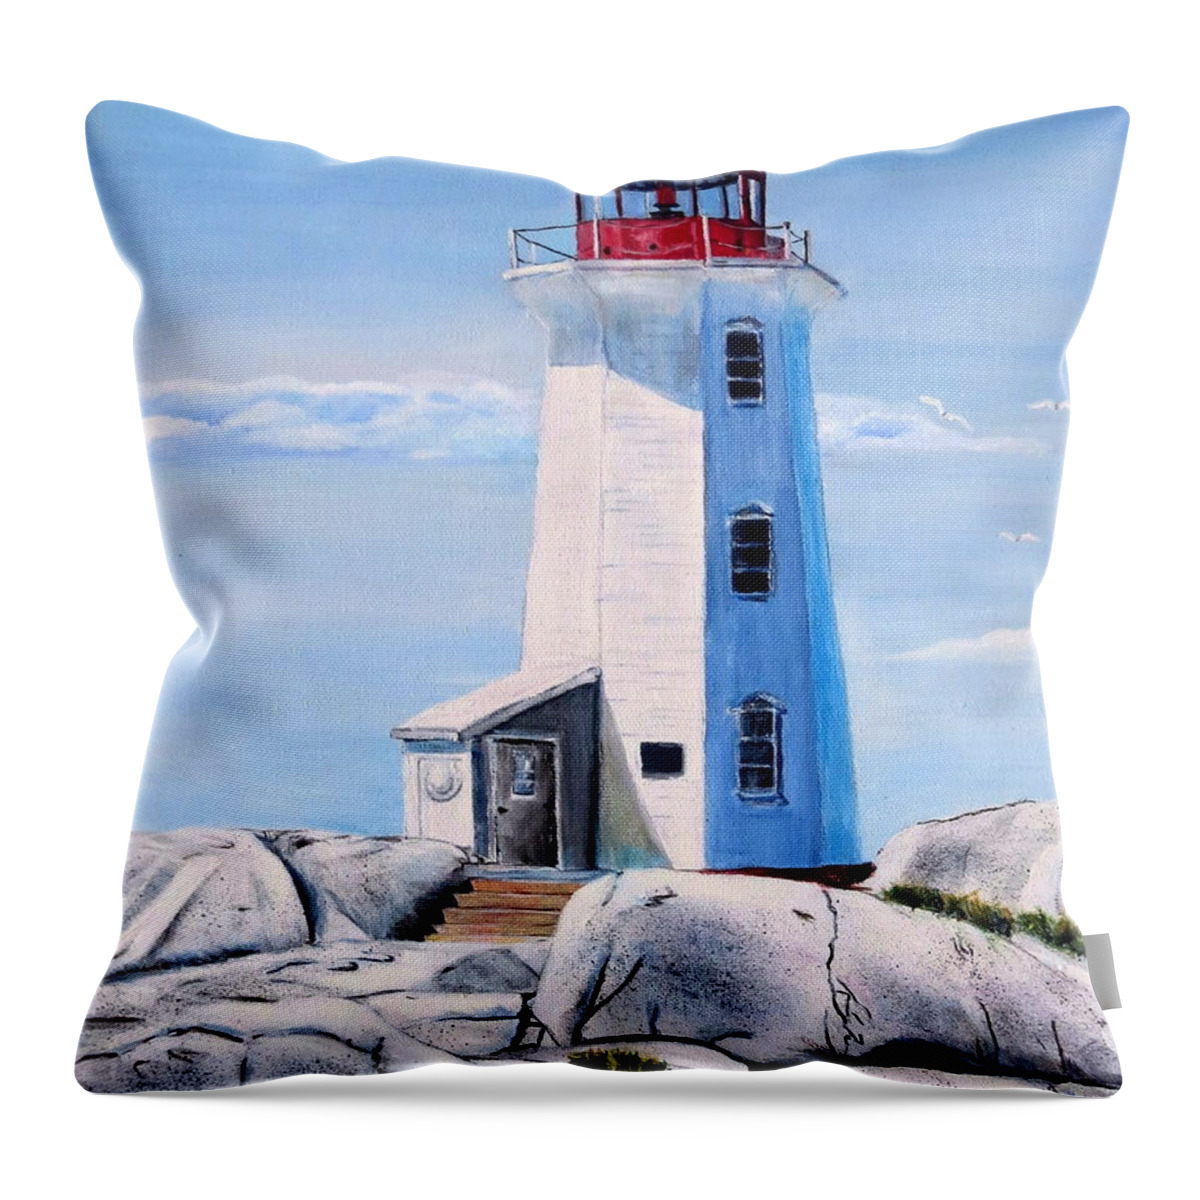 Peggy's Cove Throw Pillow featuring the painting Peggy's Cove Lighthouse by Marilyn McNish